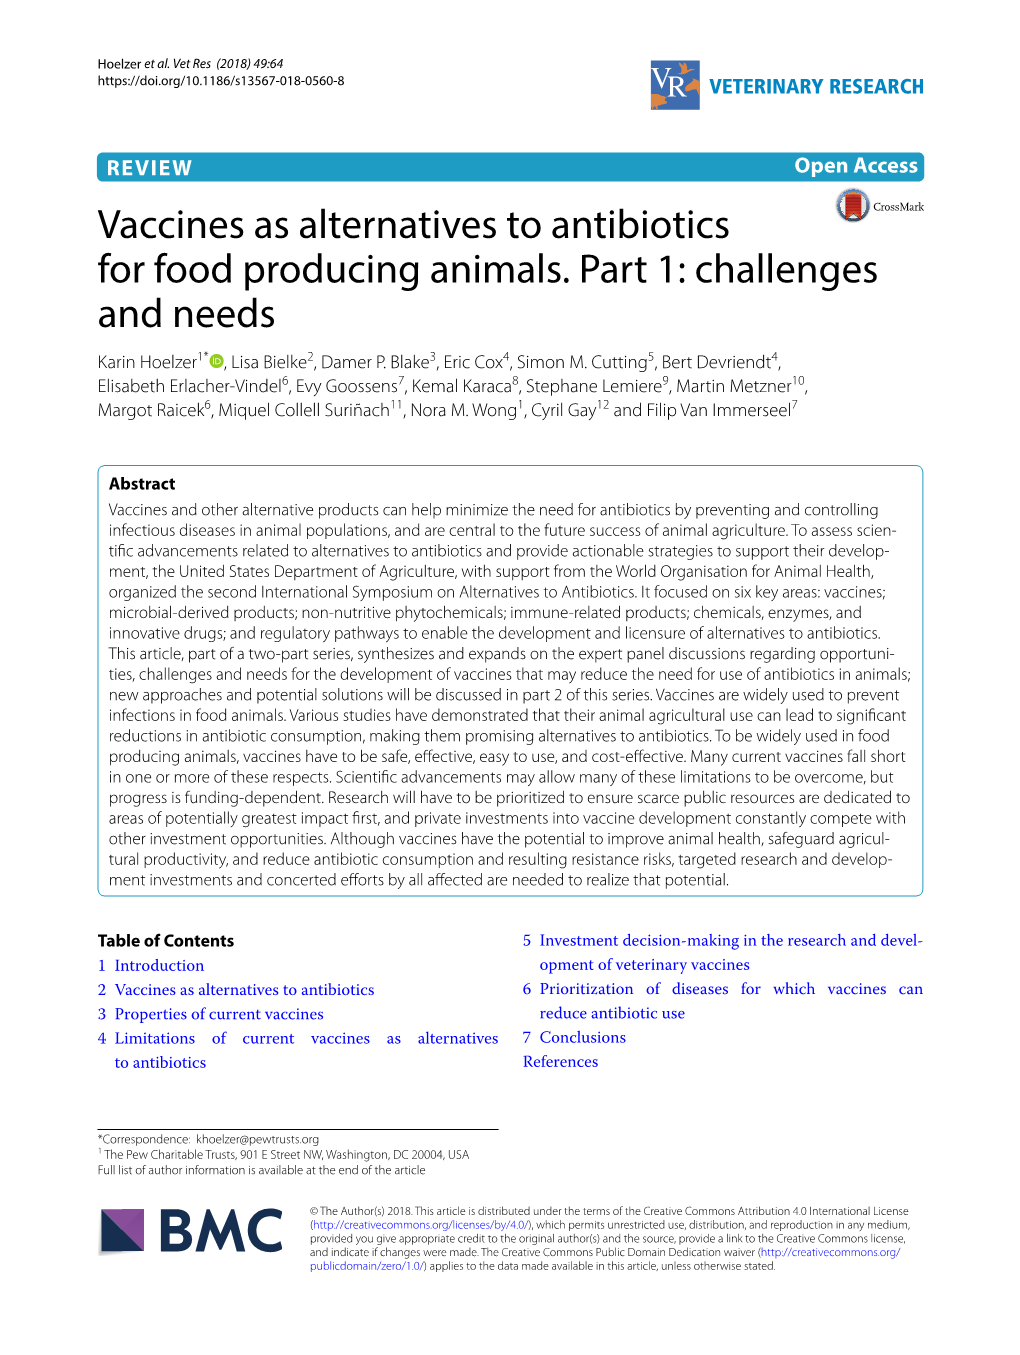 Vaccines As Alternatives to Antibiotics for Food Producing Animals